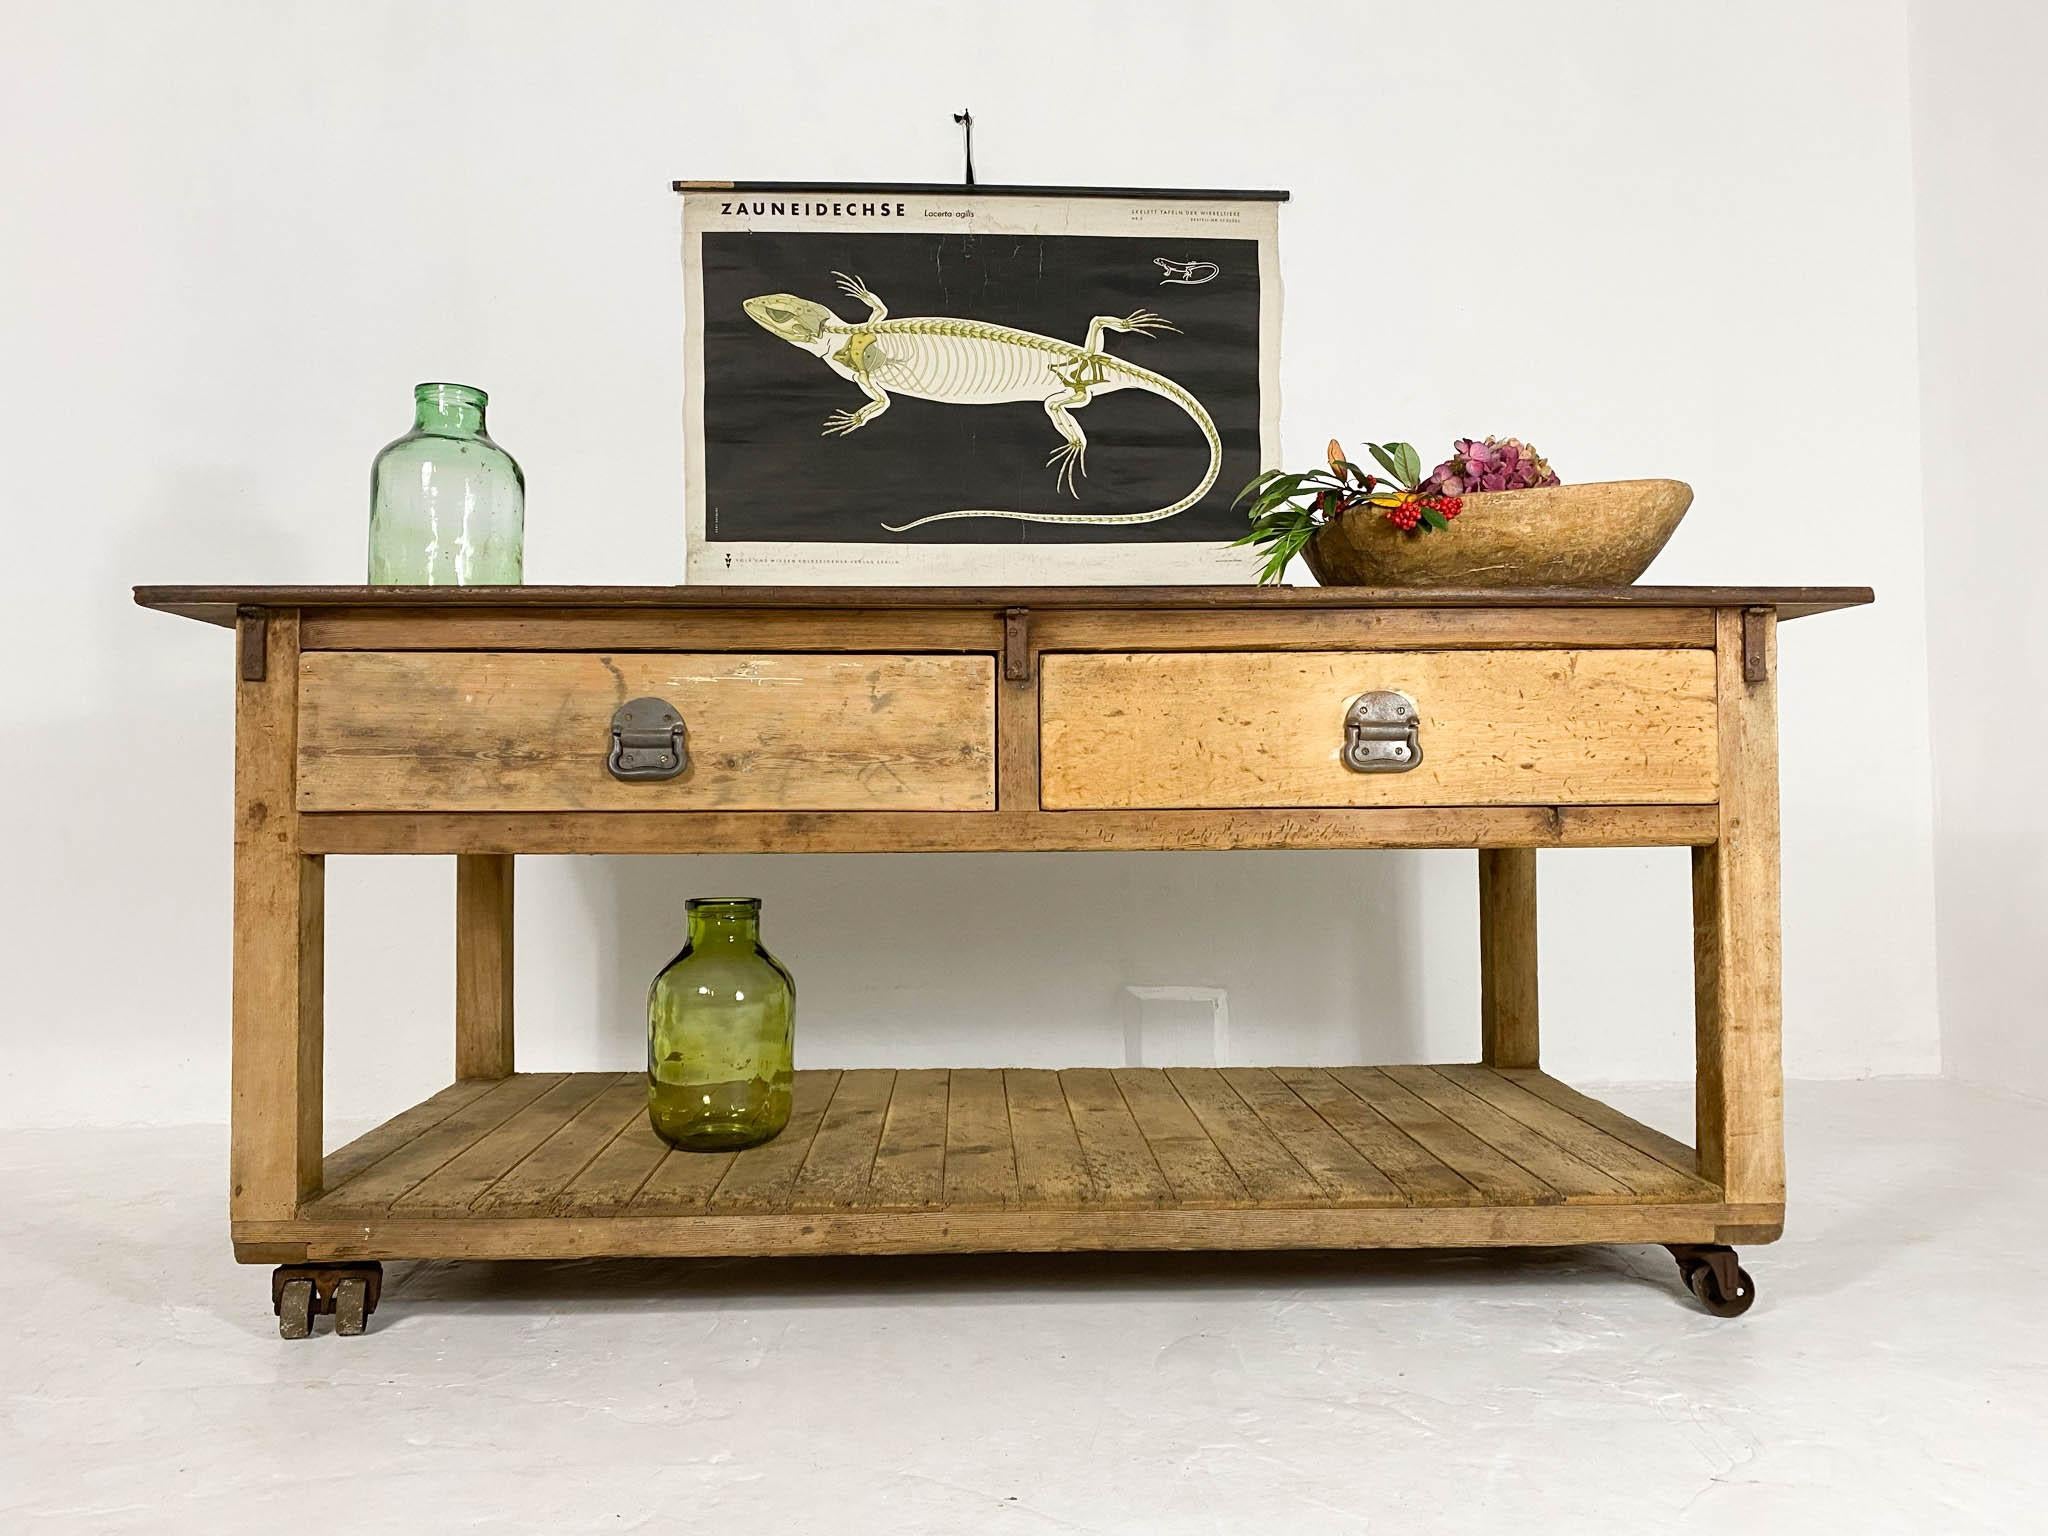 English Antique Baker's Table with Hardwood Top Vintage Industrial Workbench Worktable For Sale